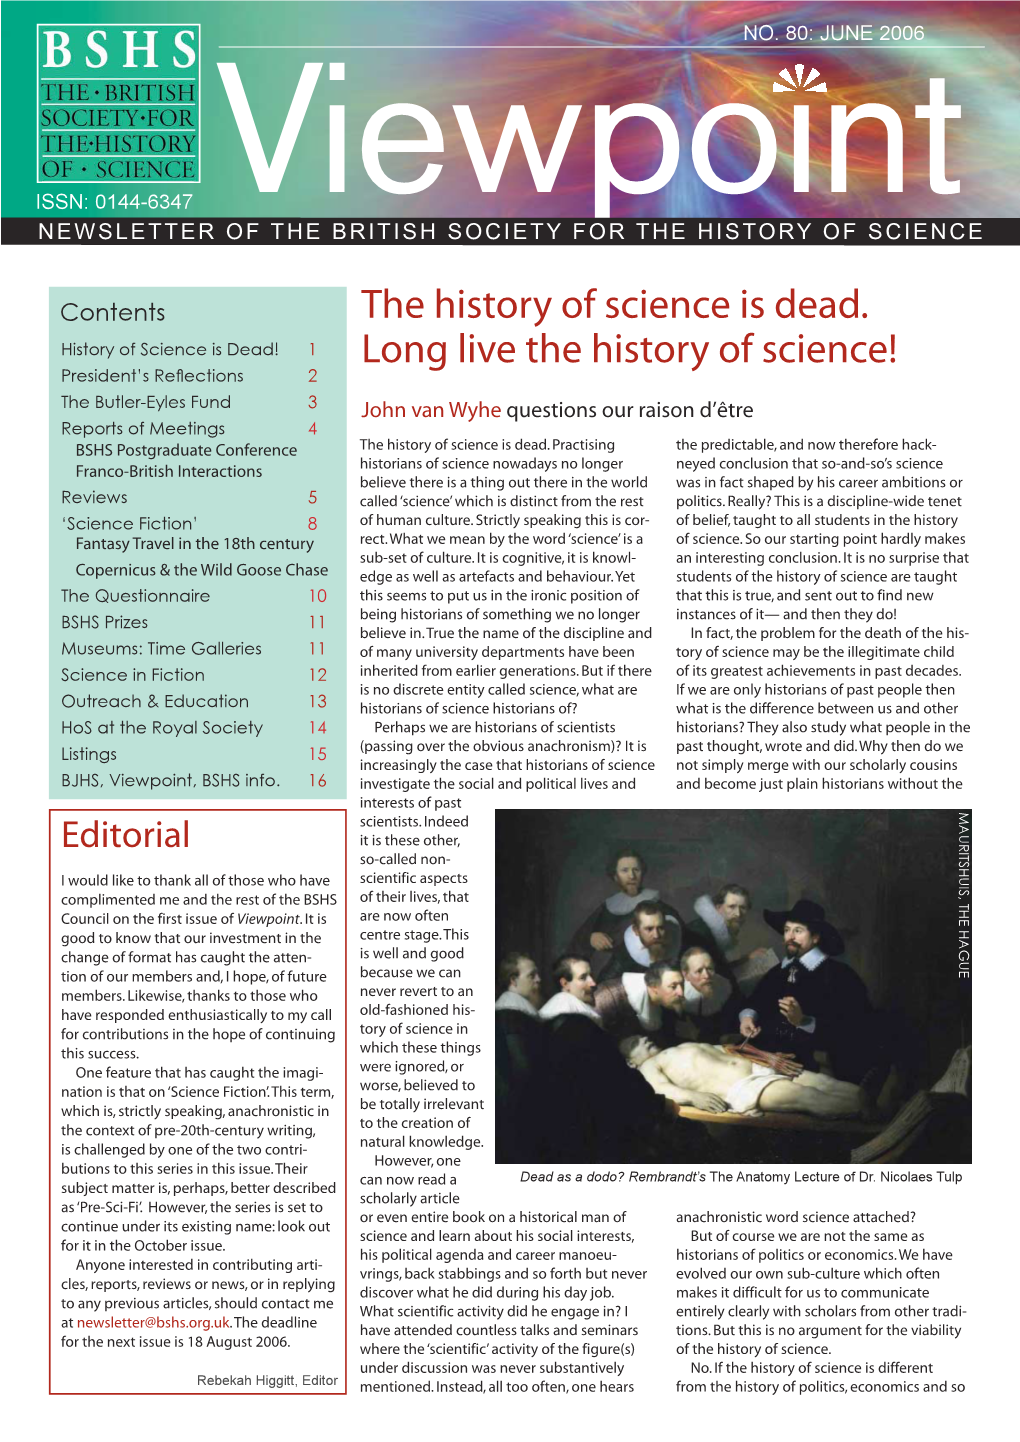 The History of Science Is Dead. Long Live the History of Science!